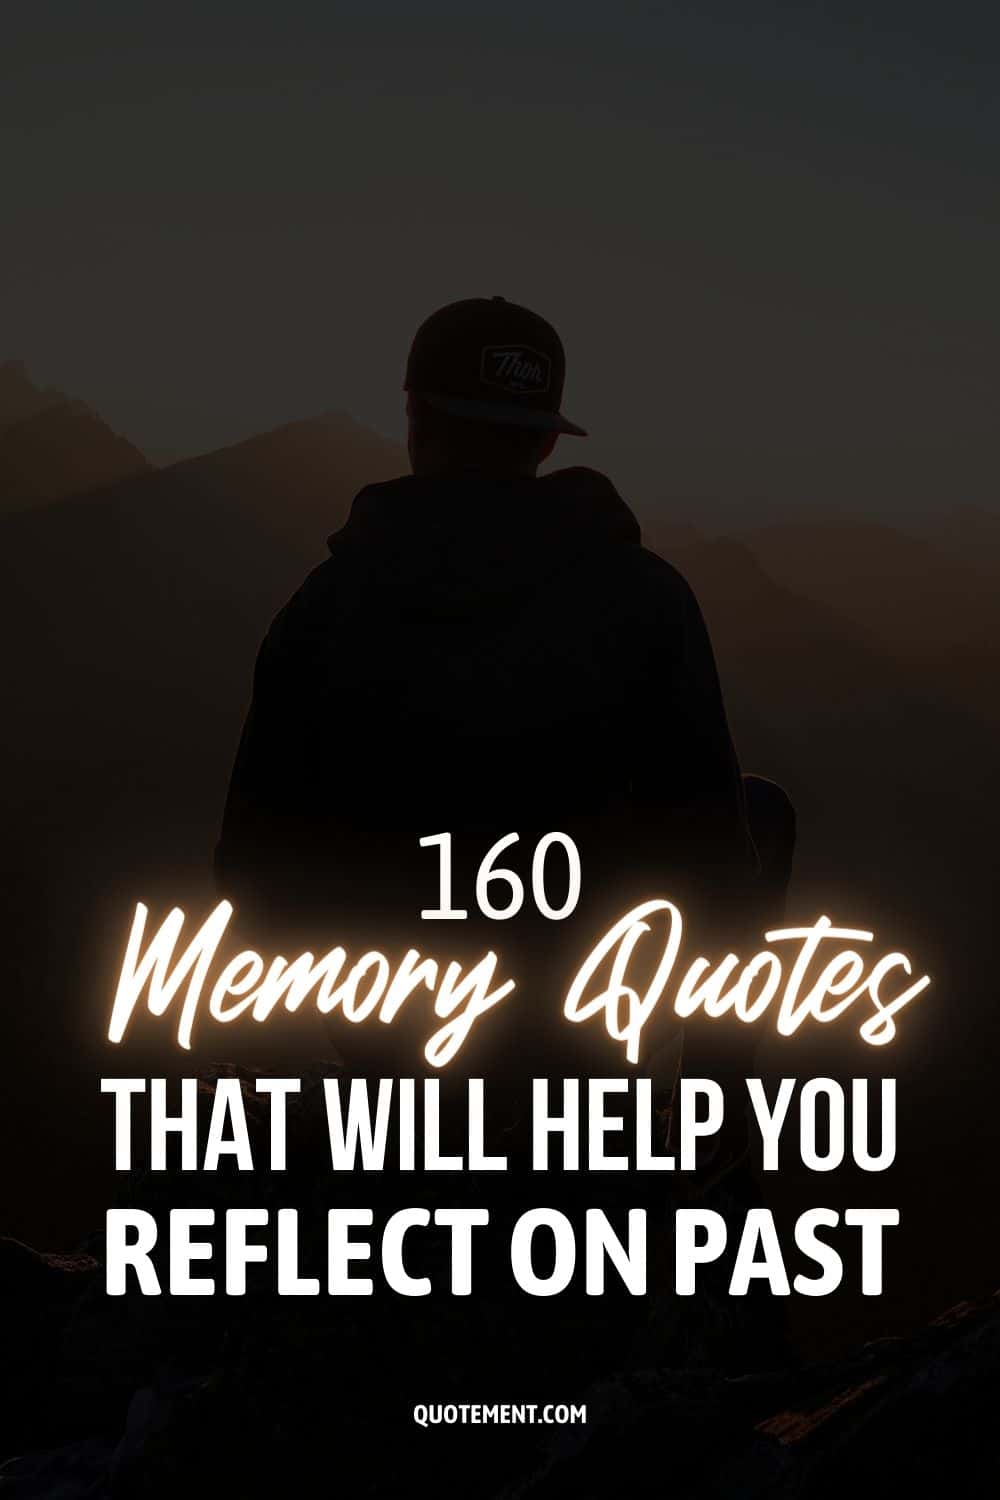 160 Memory Quotes That Will Help You Reflect On Past